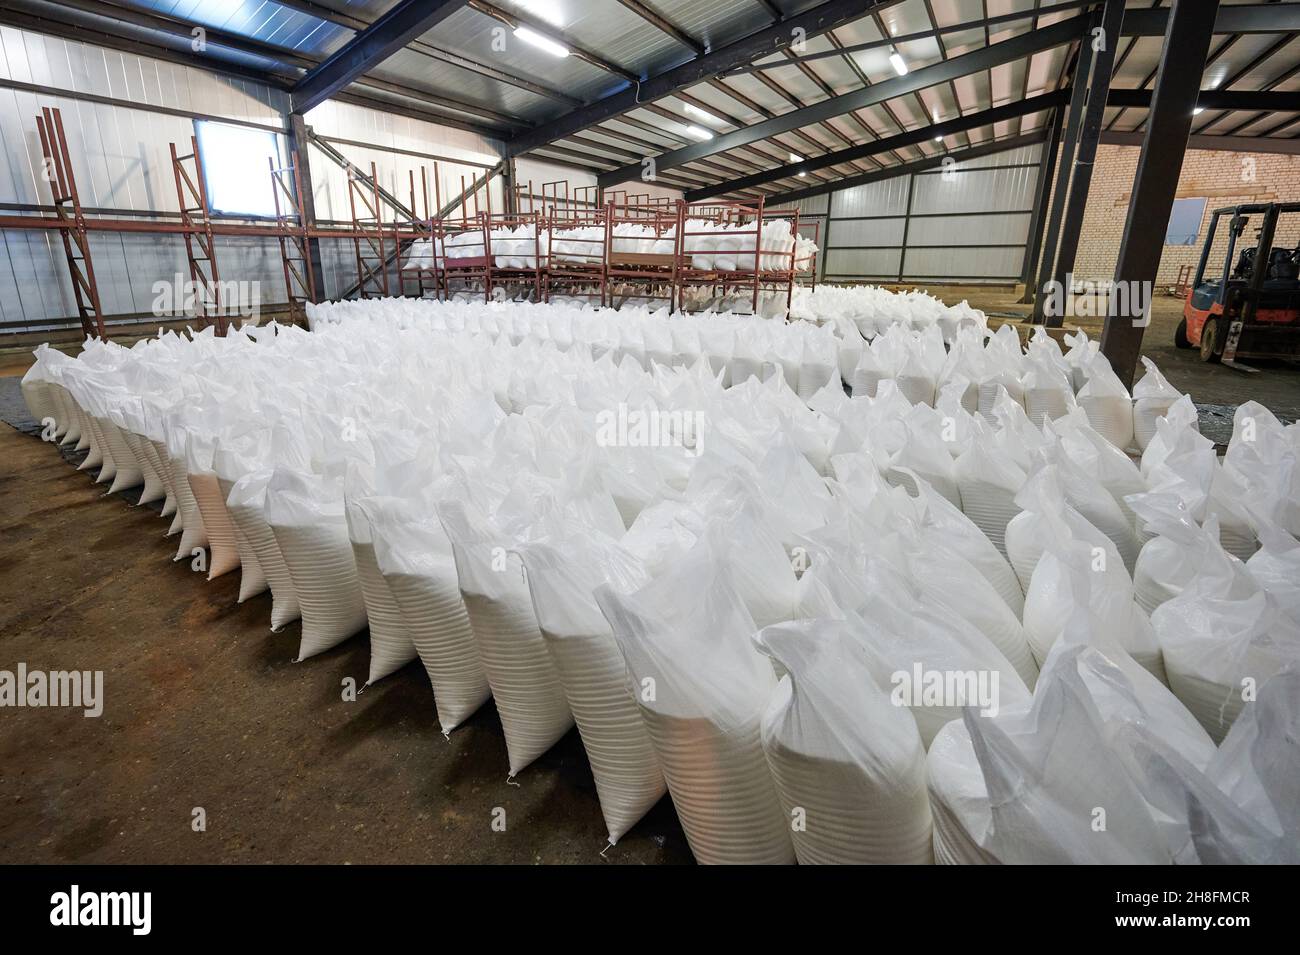 Many white bags in warehouse store for shipment Stock Photo